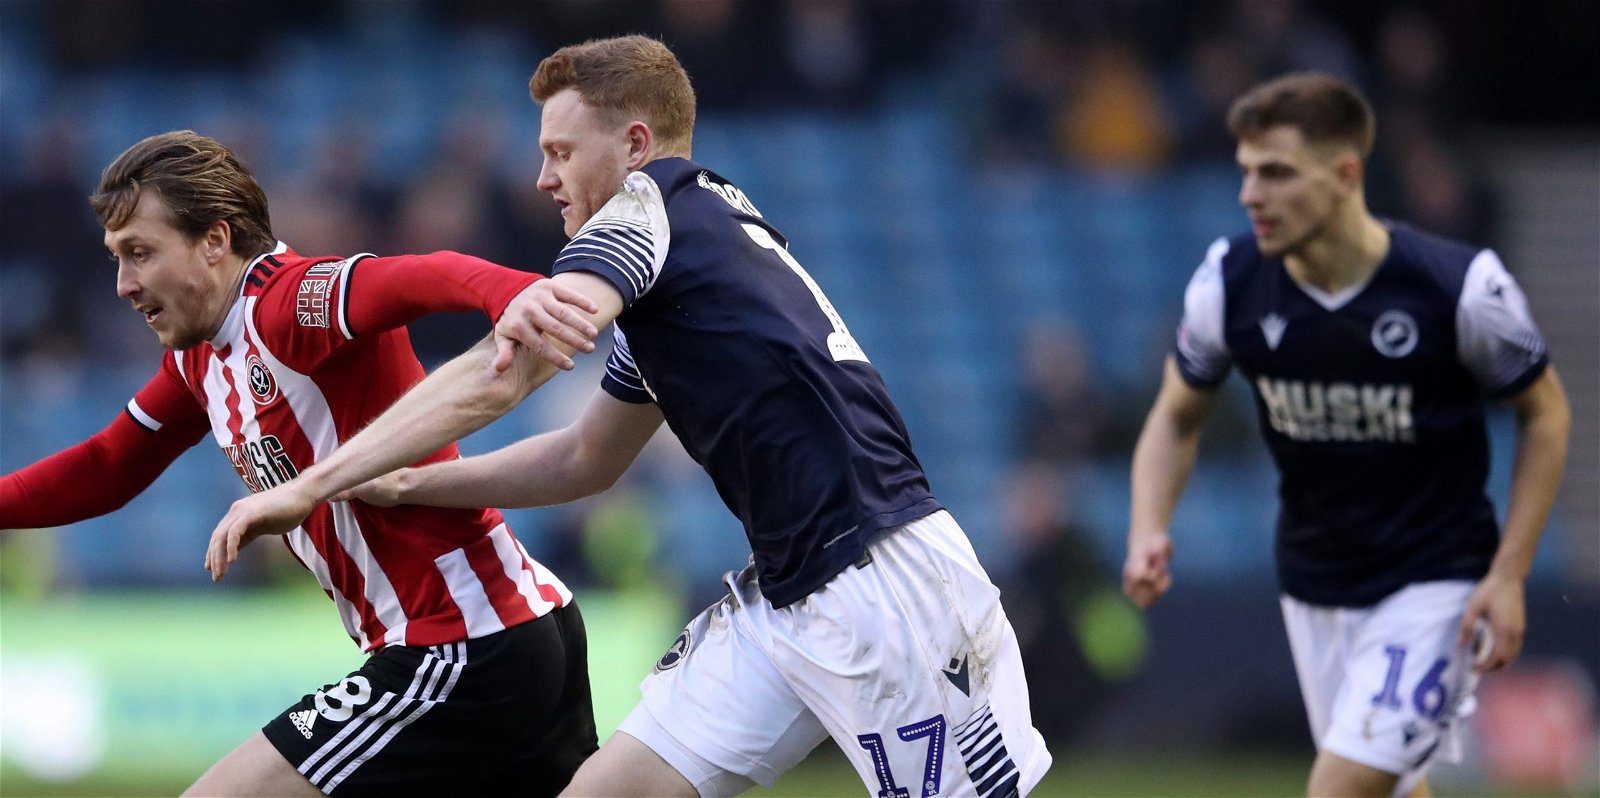 , James Brown in talks with St Johnstone after Millwall release